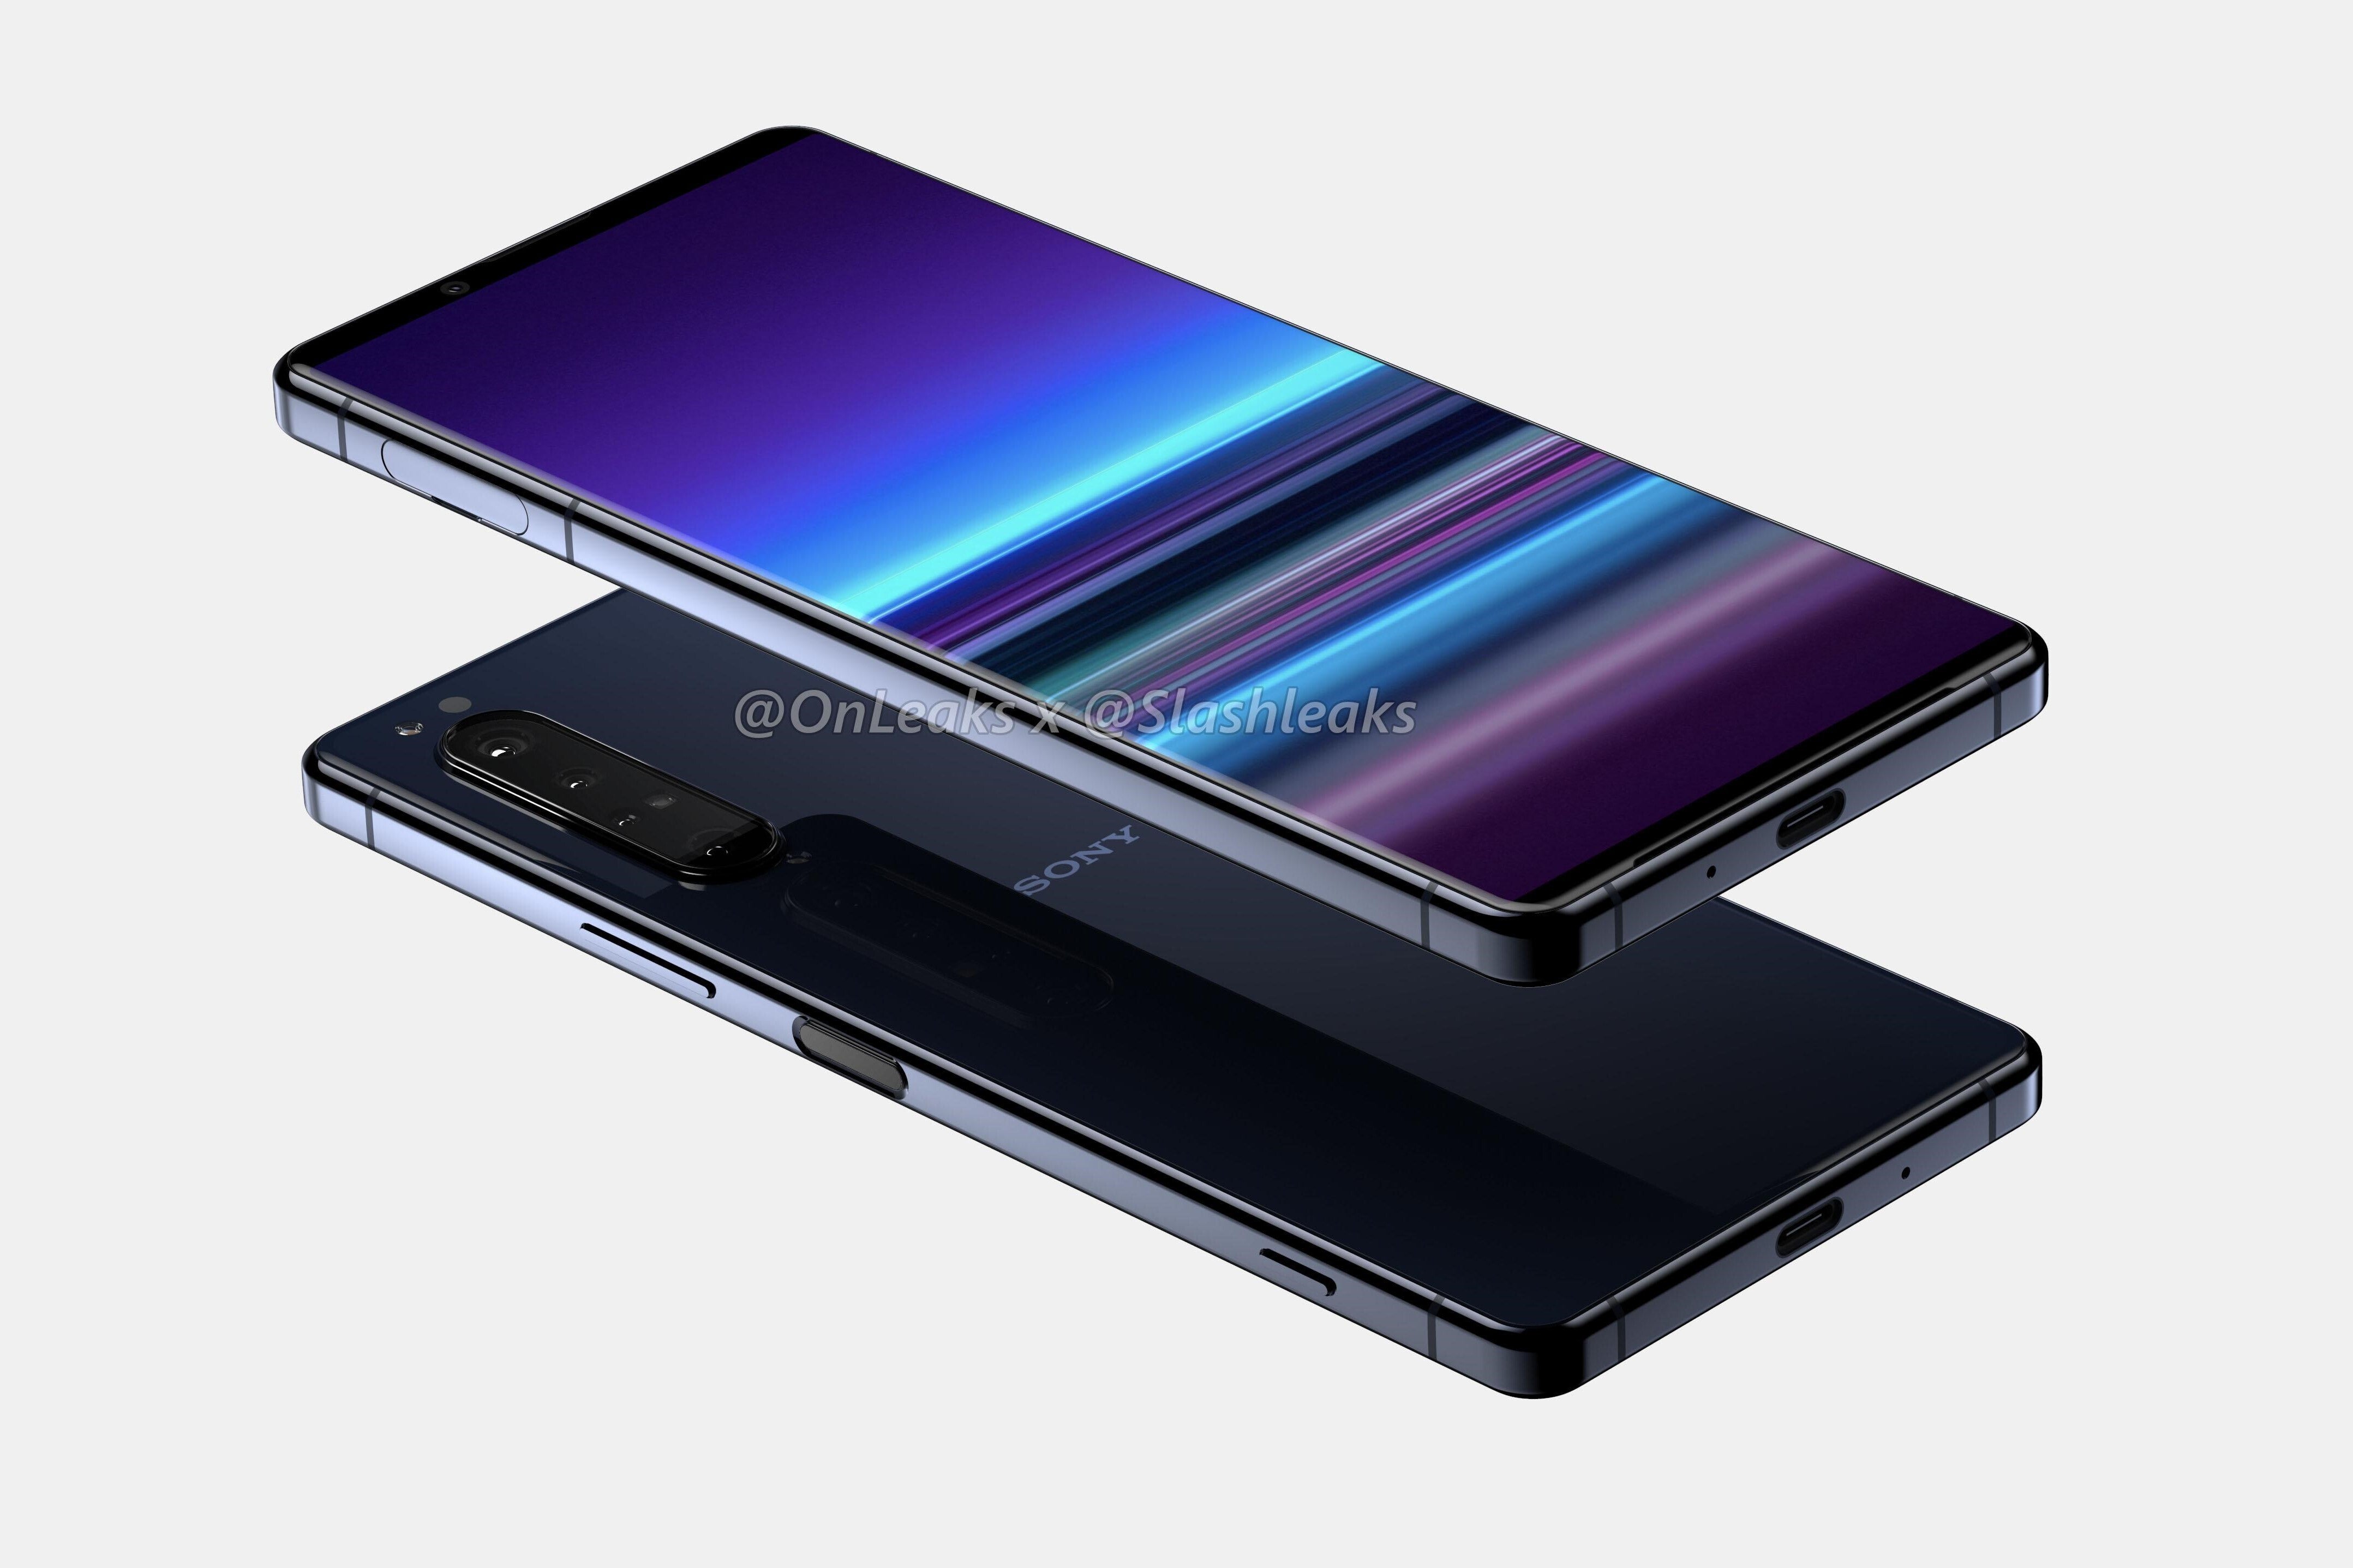 Sony Xperia 1.2 render - Sony Xperia 1.2 (5 Plus)/(Sony 2020 flagship) rumor review: Design, specs, price, release date